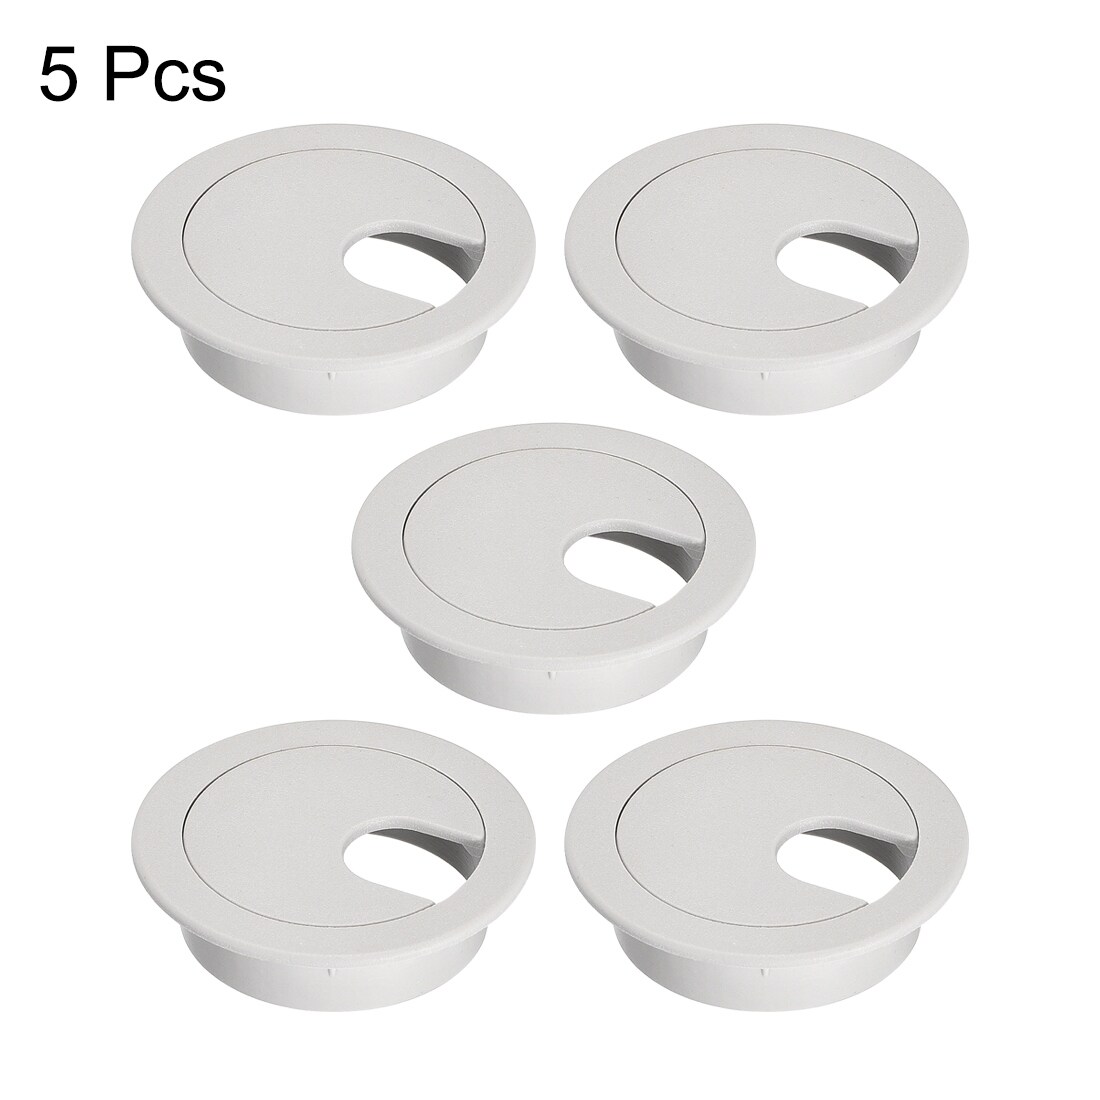 5pcs Cable Hole Cover 1-3/8" Plastic Desk Grommet for Wire Organizer Gray